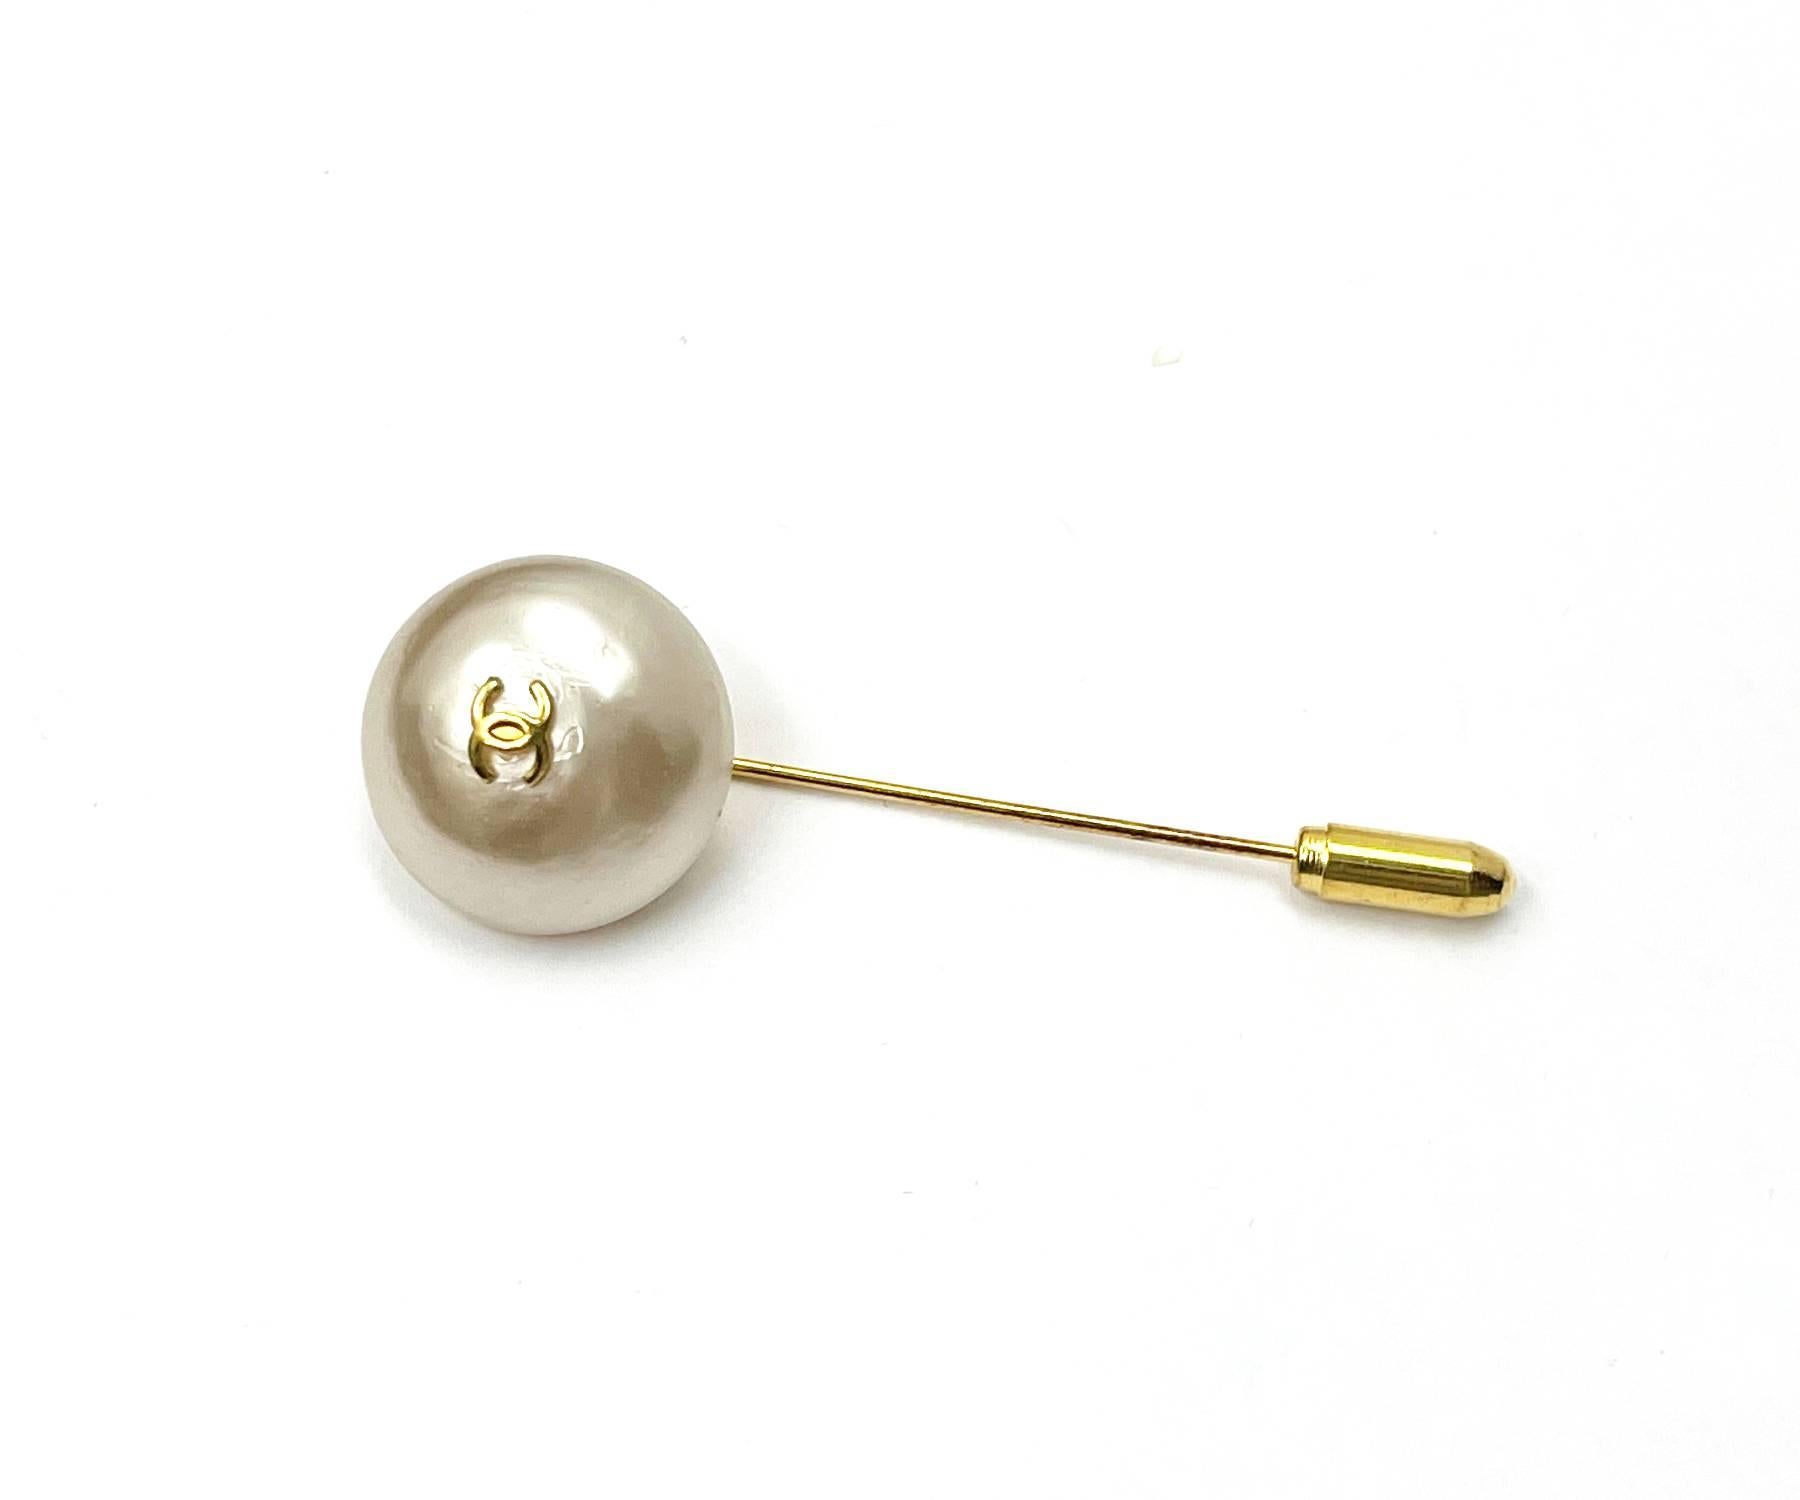 Chanel Vintage Classic Gold Plated CC Faux Pearl Pin Brooch

*Marked 95
*Made in France

-Approximately 2